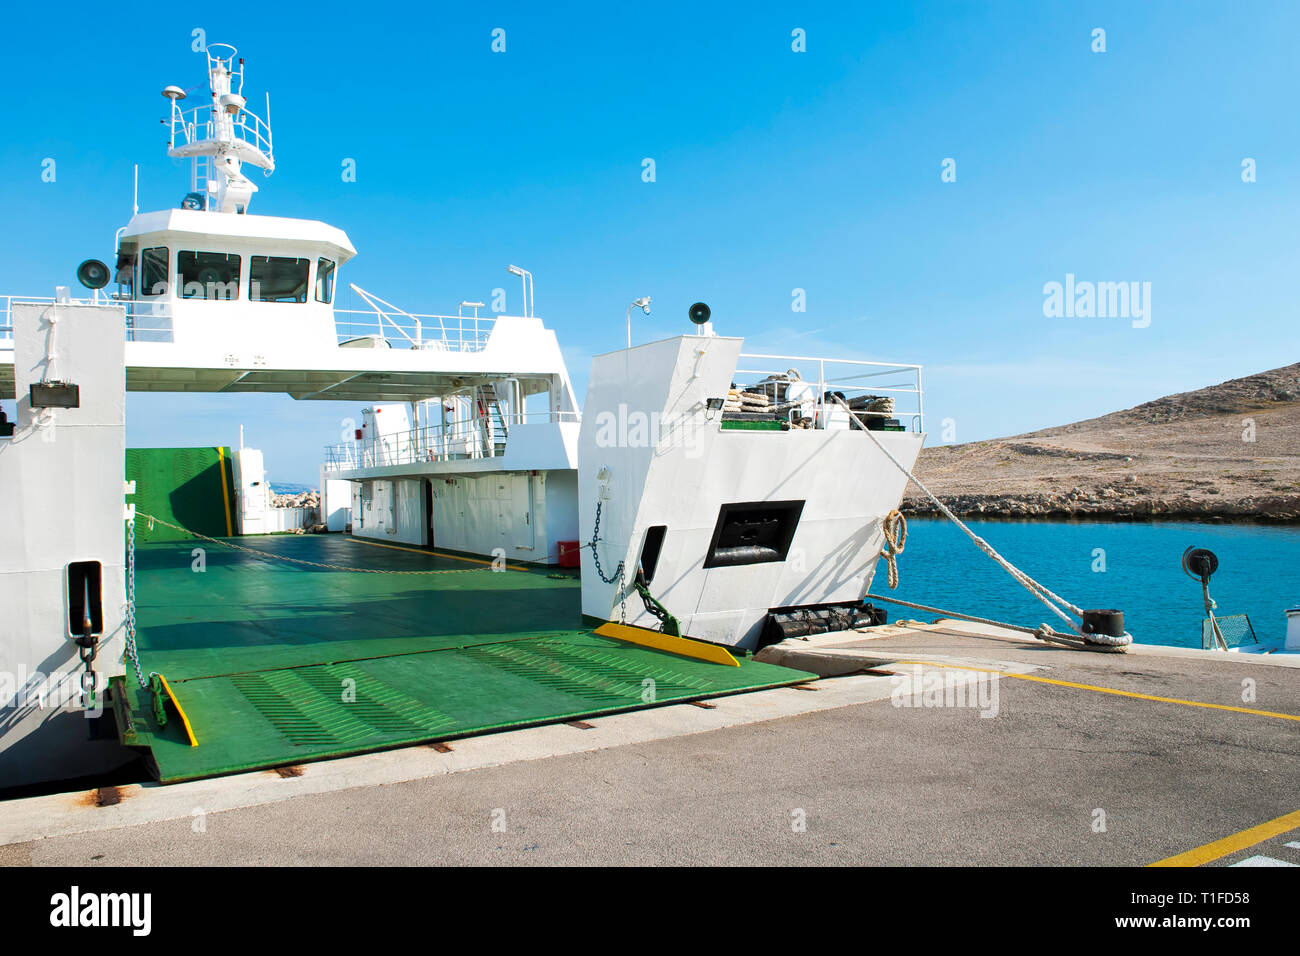 Car ferry boat in Croatia linking the island Rab to mainland with open ramp, waiting for boarding. Stock Photo